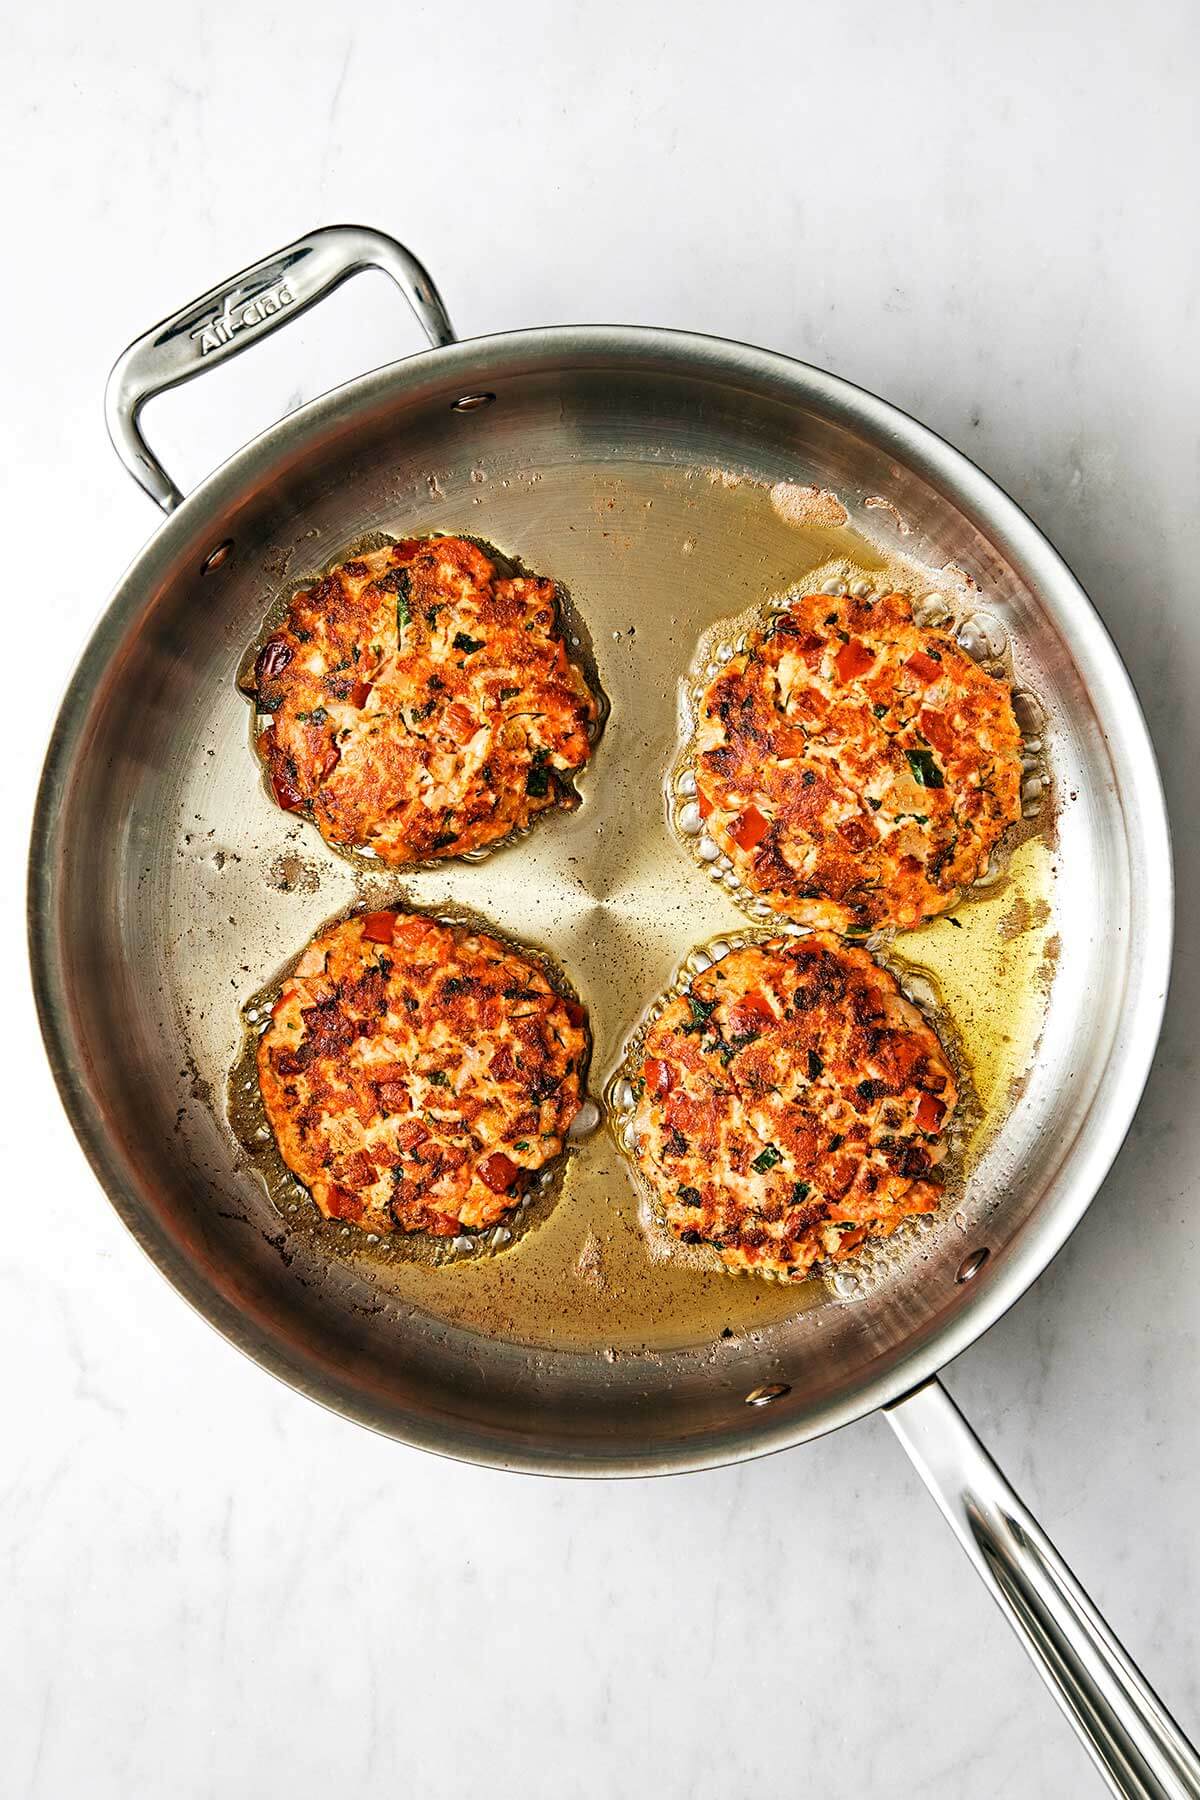 Cooking salmon patties in a pan with oil.